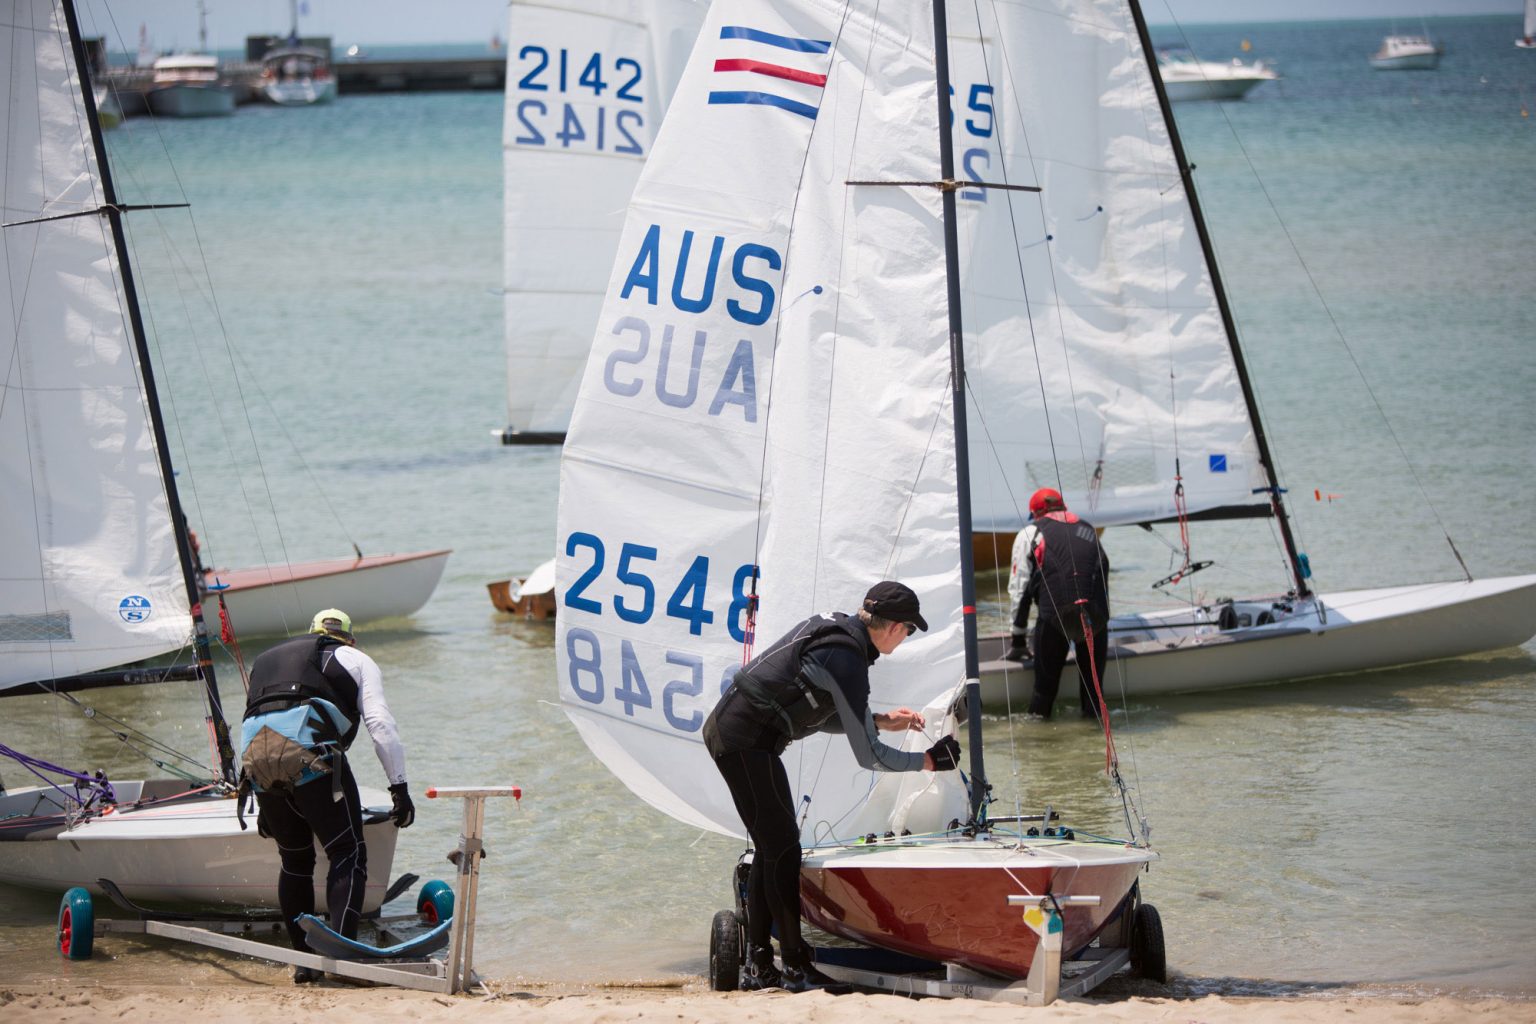 blairgowrie yacht club results